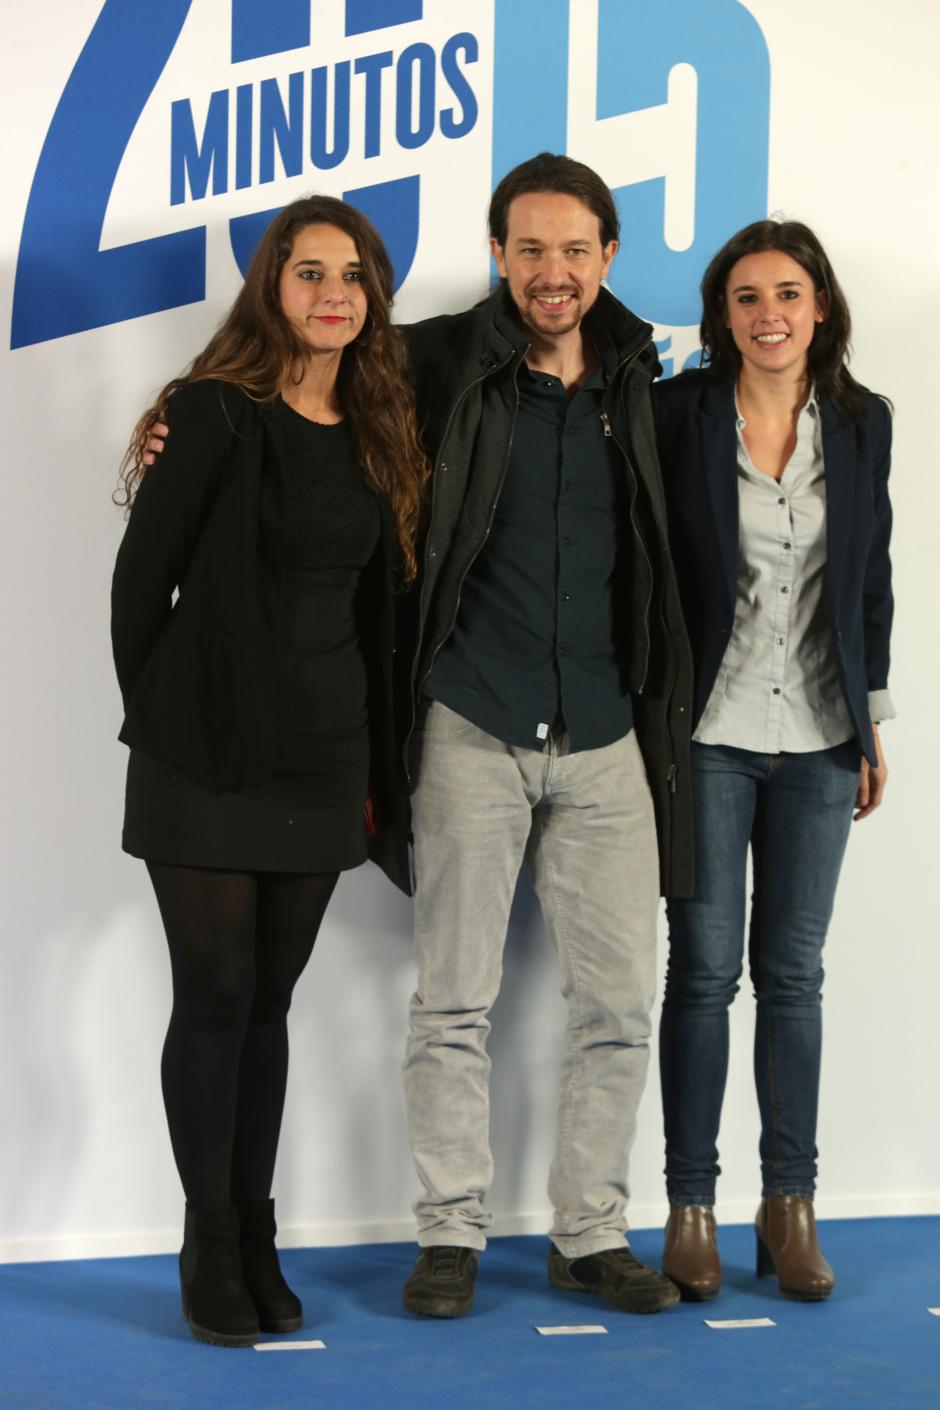 Poltiician Pablo Iglesias with Irene Montero and Noelia Vera at celebration of 15th Anniversary of 20Minutos Diary in Madrid. 24/11/2015